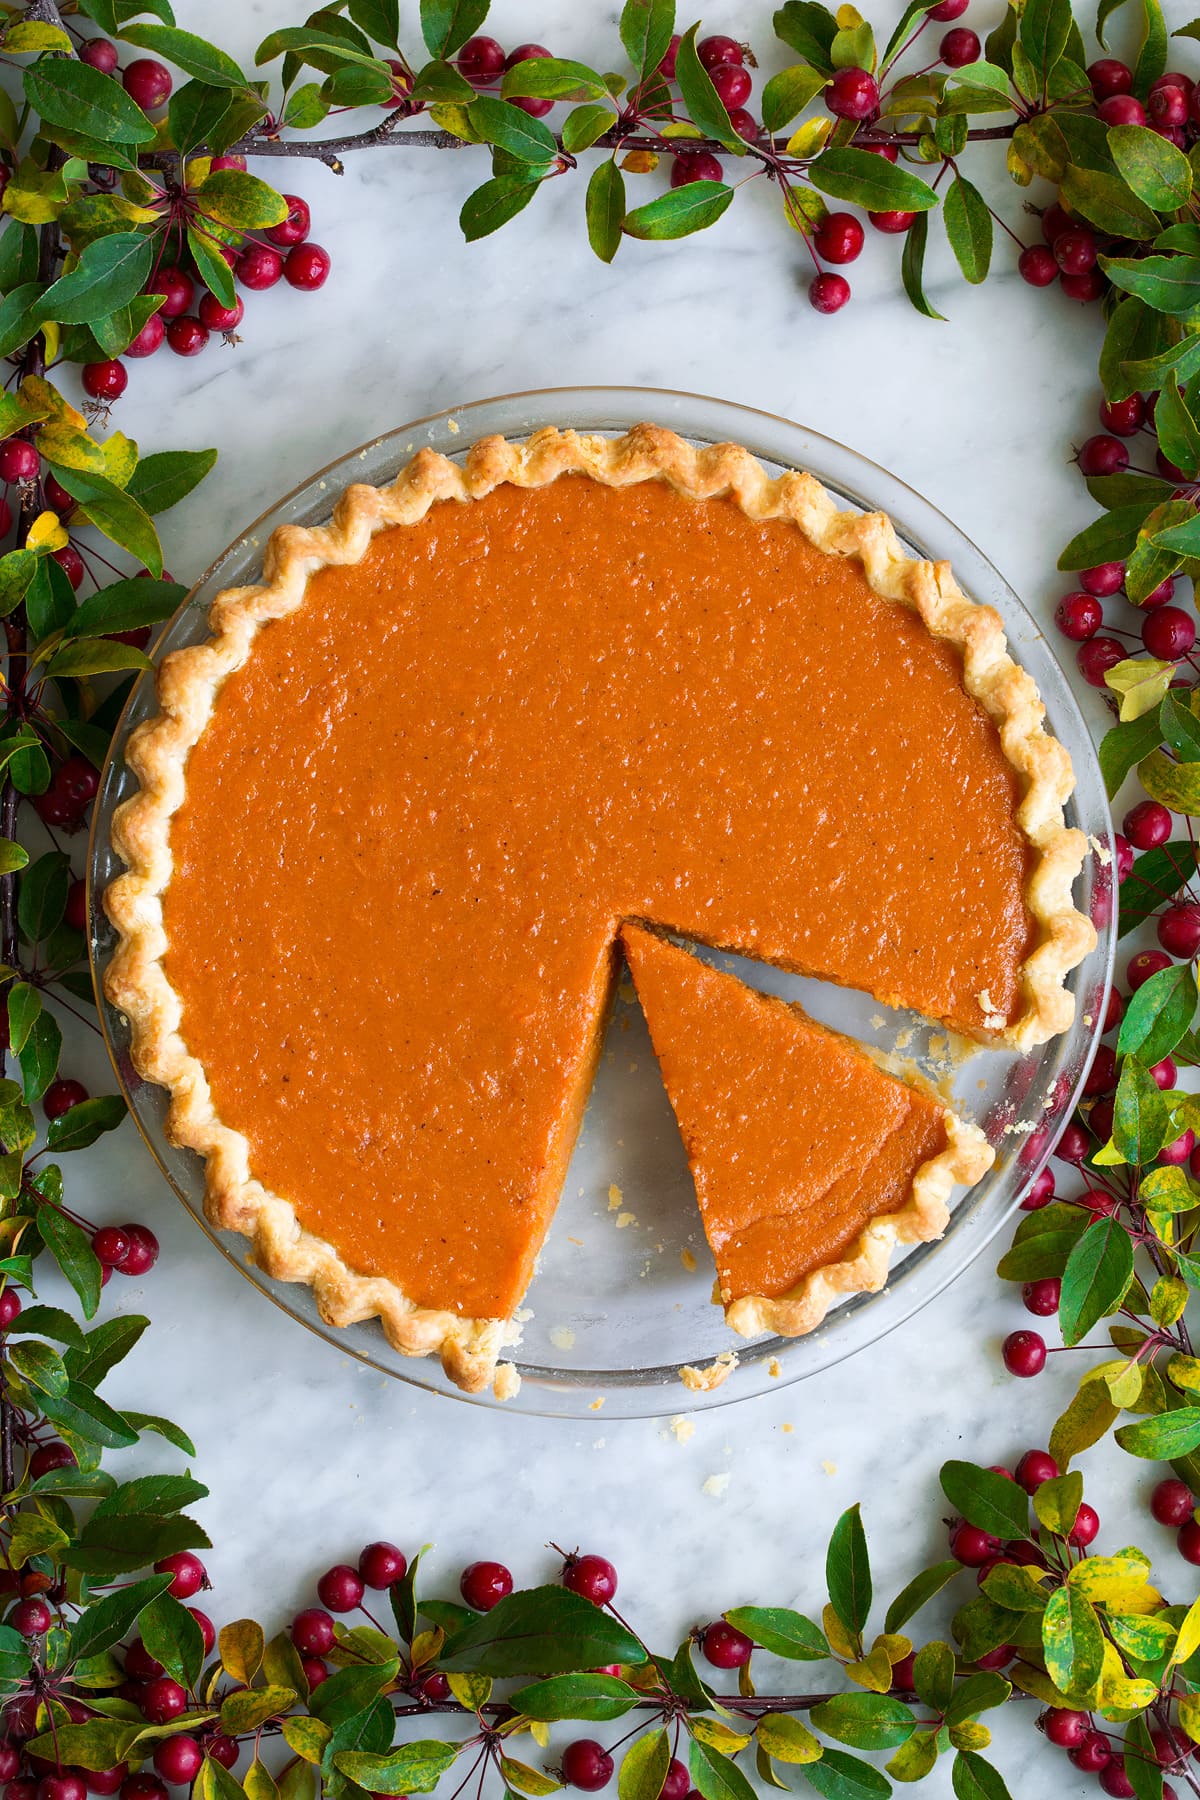 Sweet potato pie with one sliced cut. It's decorated with berry tree branches around it.